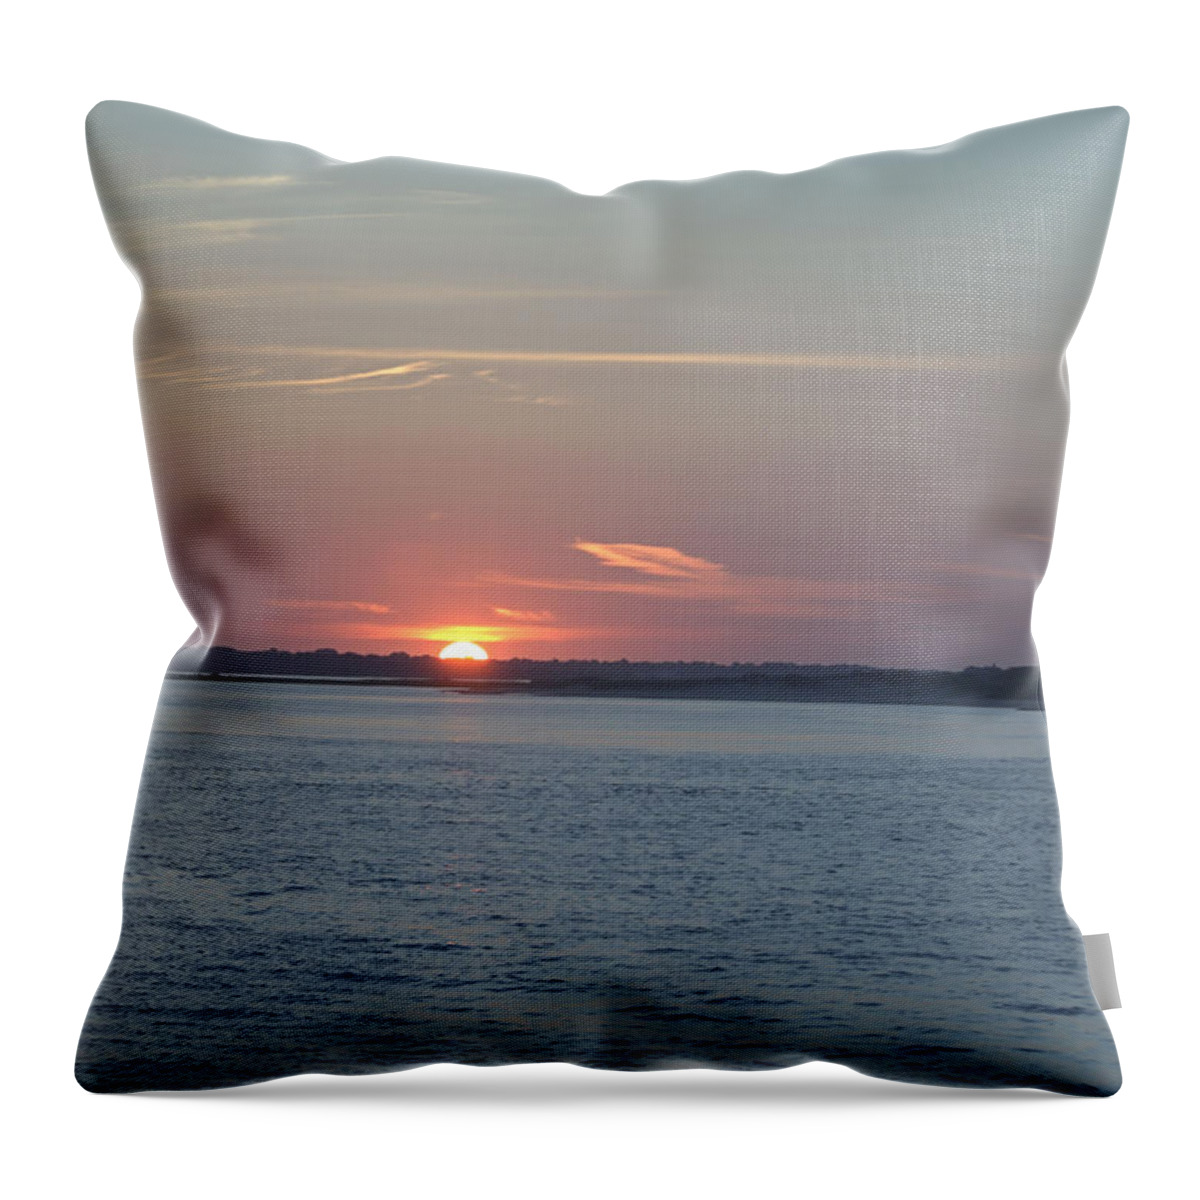 Sunrise Throw Pillow featuring the photograph East Cut by Newwwman